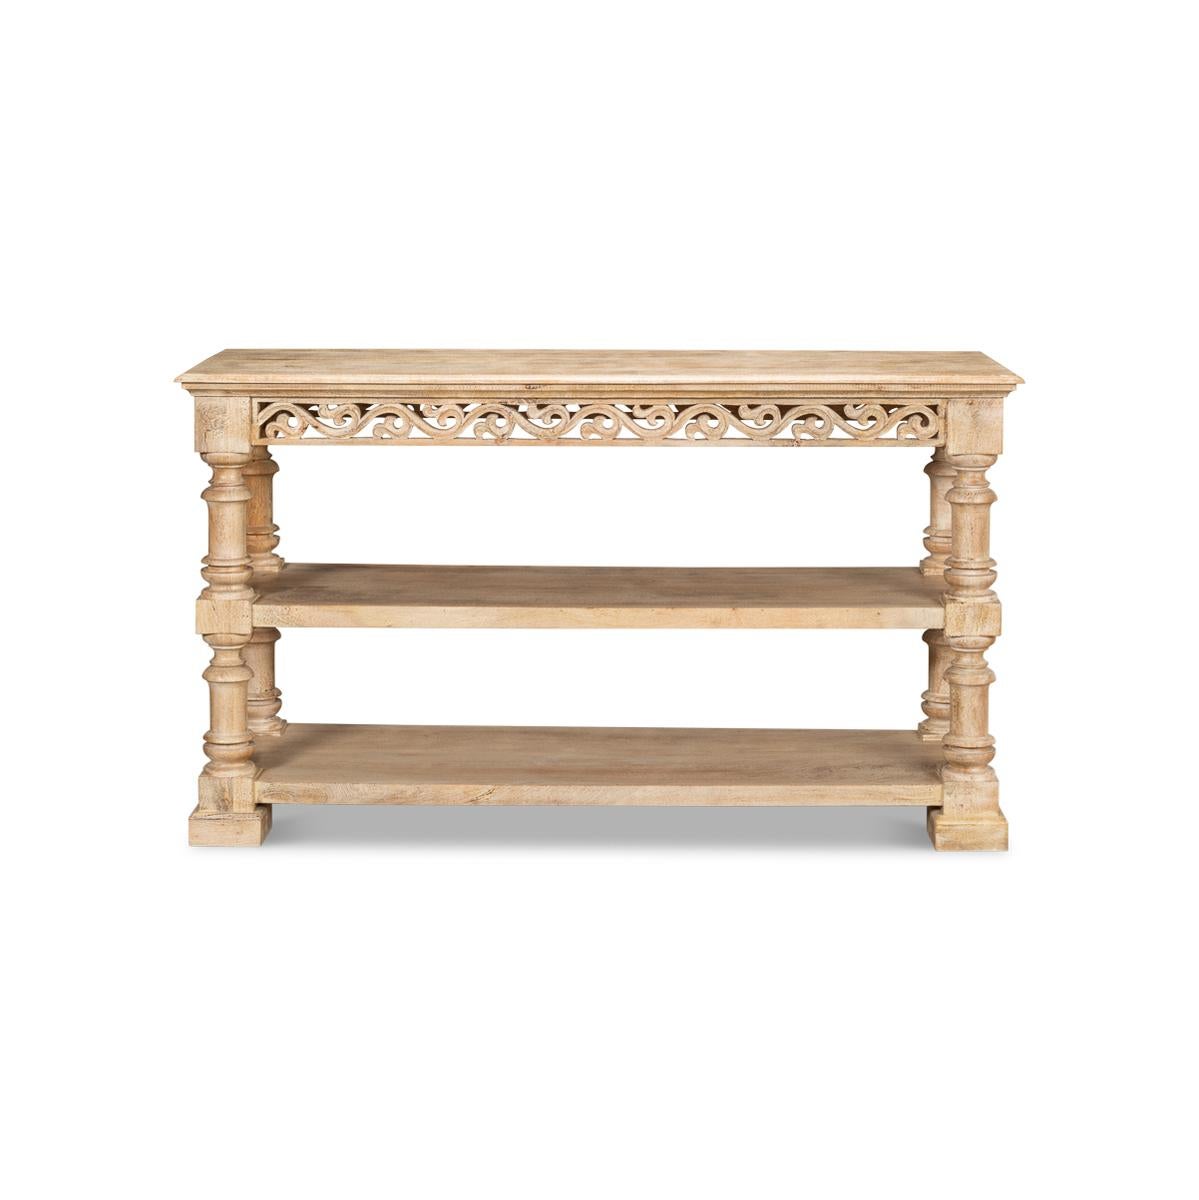 Introducing the Italian Renaissance three-tier console table, a stunning piece of furniture that will elevate any room in your home. Crafted from beautiful mango wood, this console table features a natural Sienna finish that adds warmth and